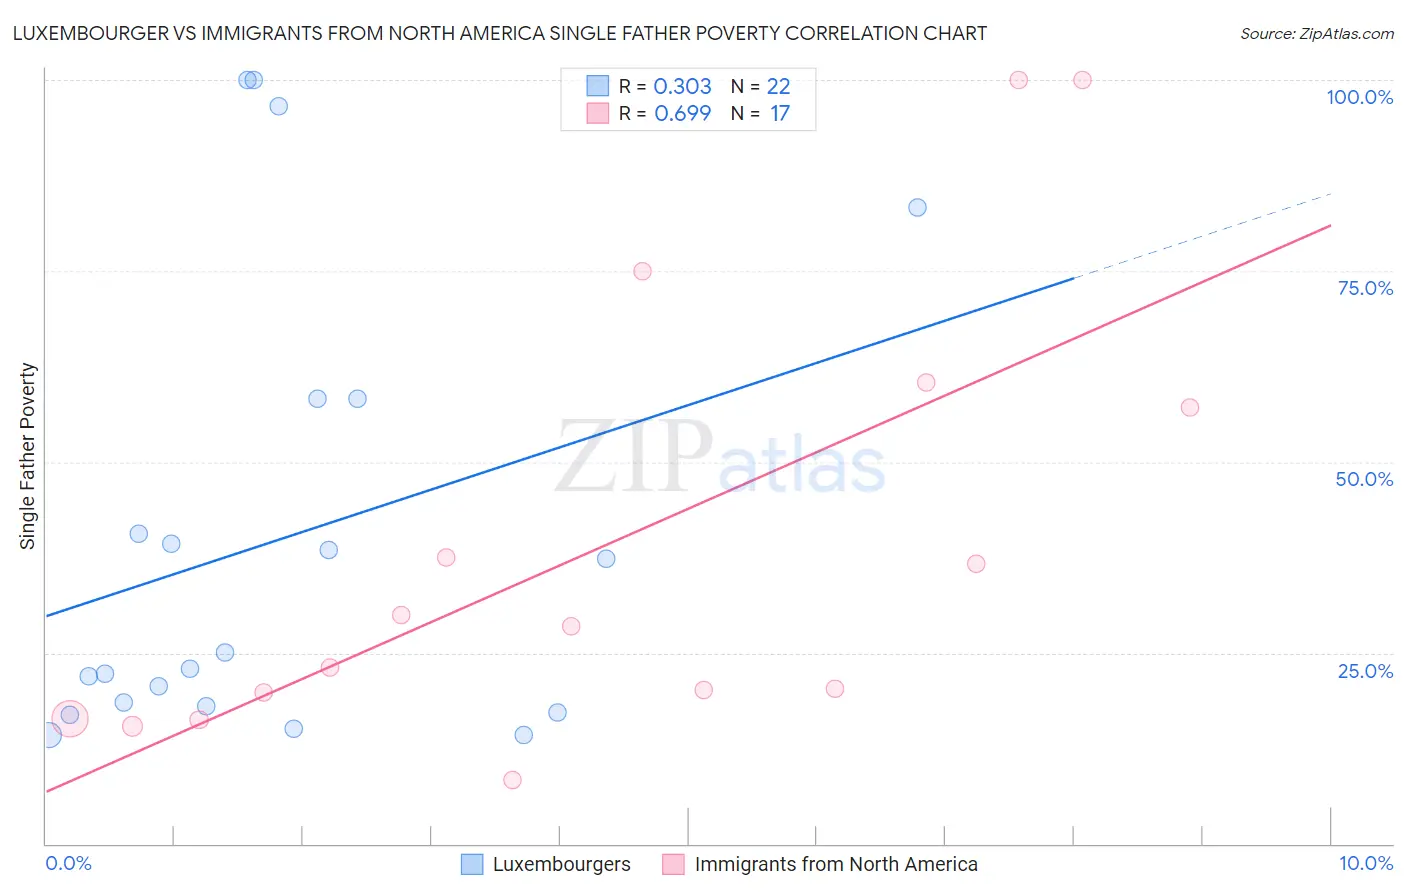 Luxembourger vs Immigrants from North America Single Father Poverty